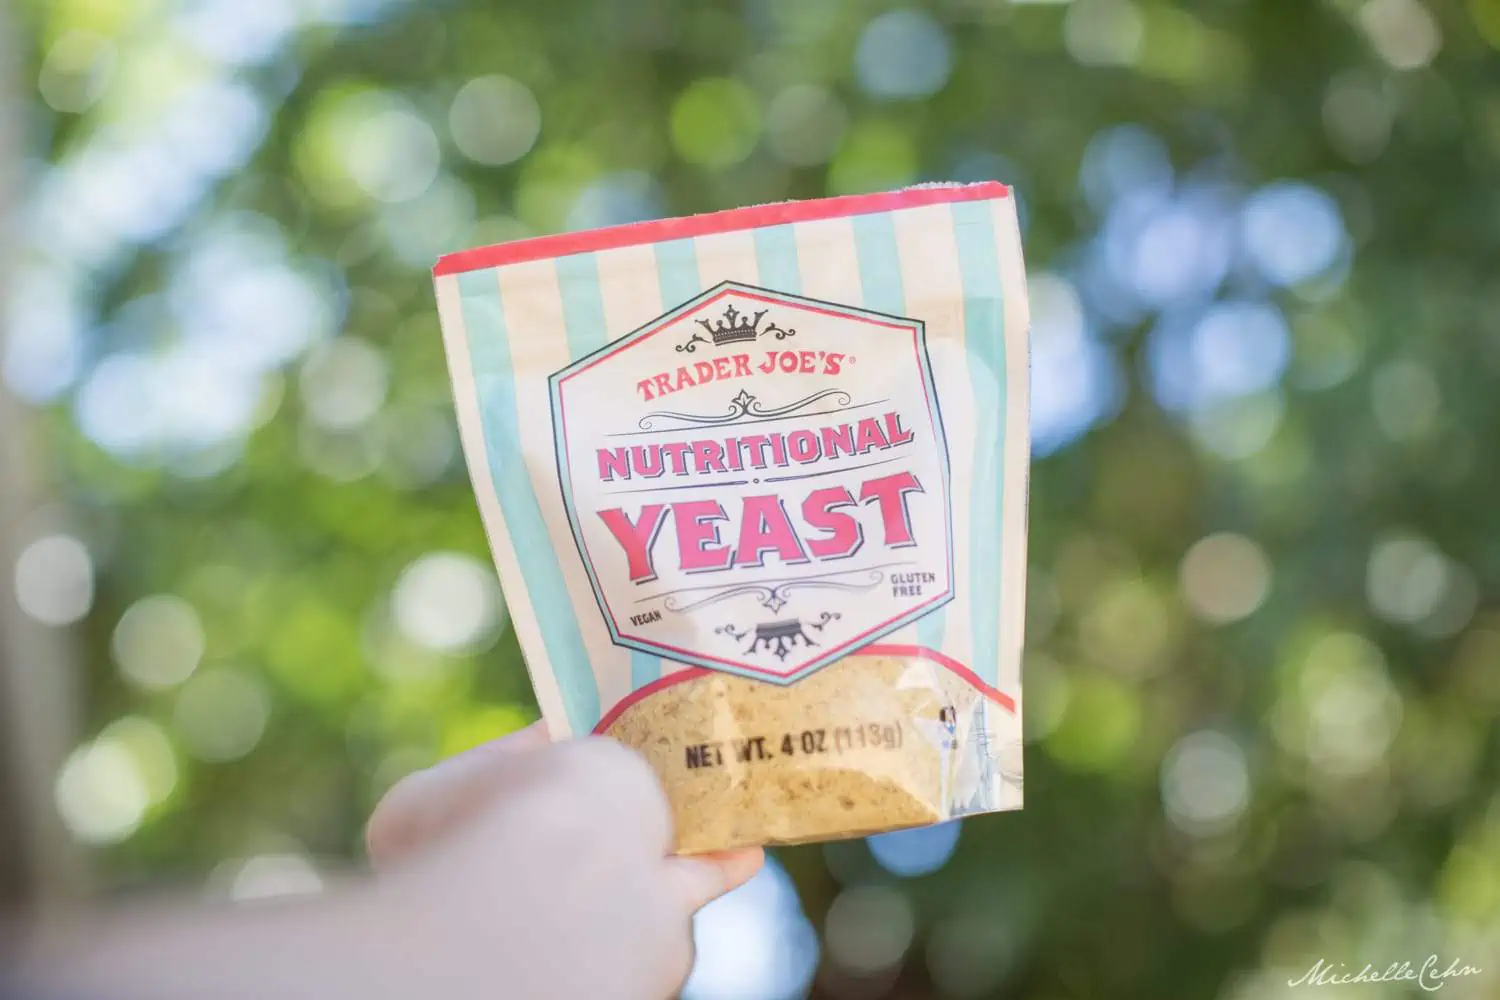 Hand holding up a bag of Trader Joe's Nutritional Yeast.